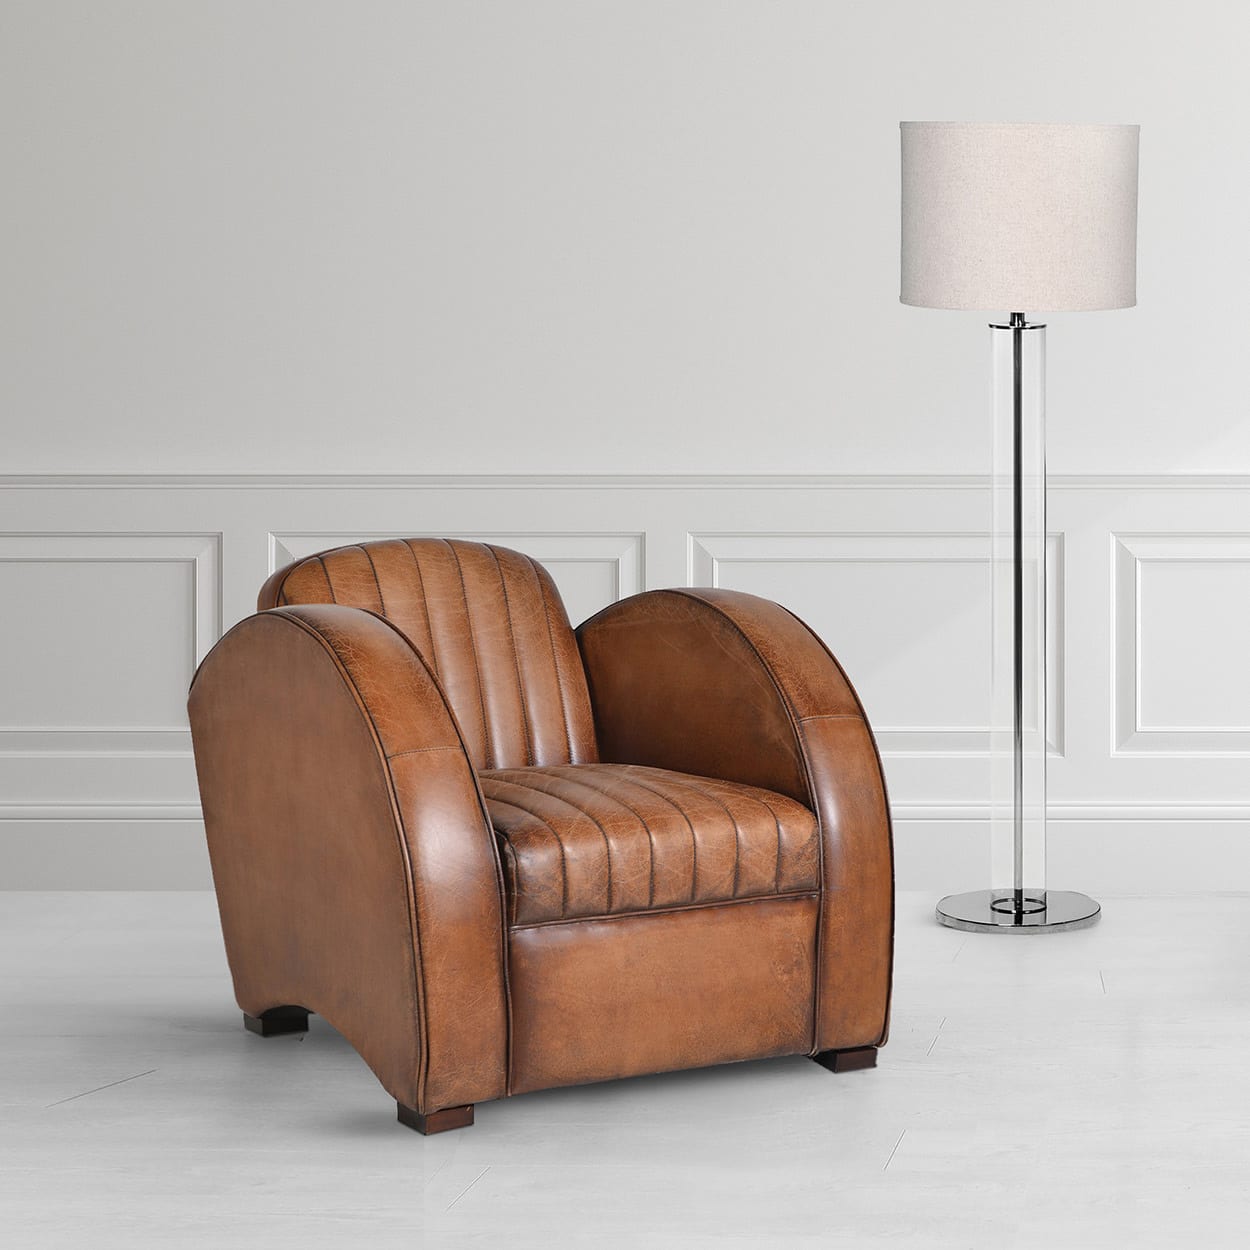 Low Back Retro Tan Brown Leather Armchair